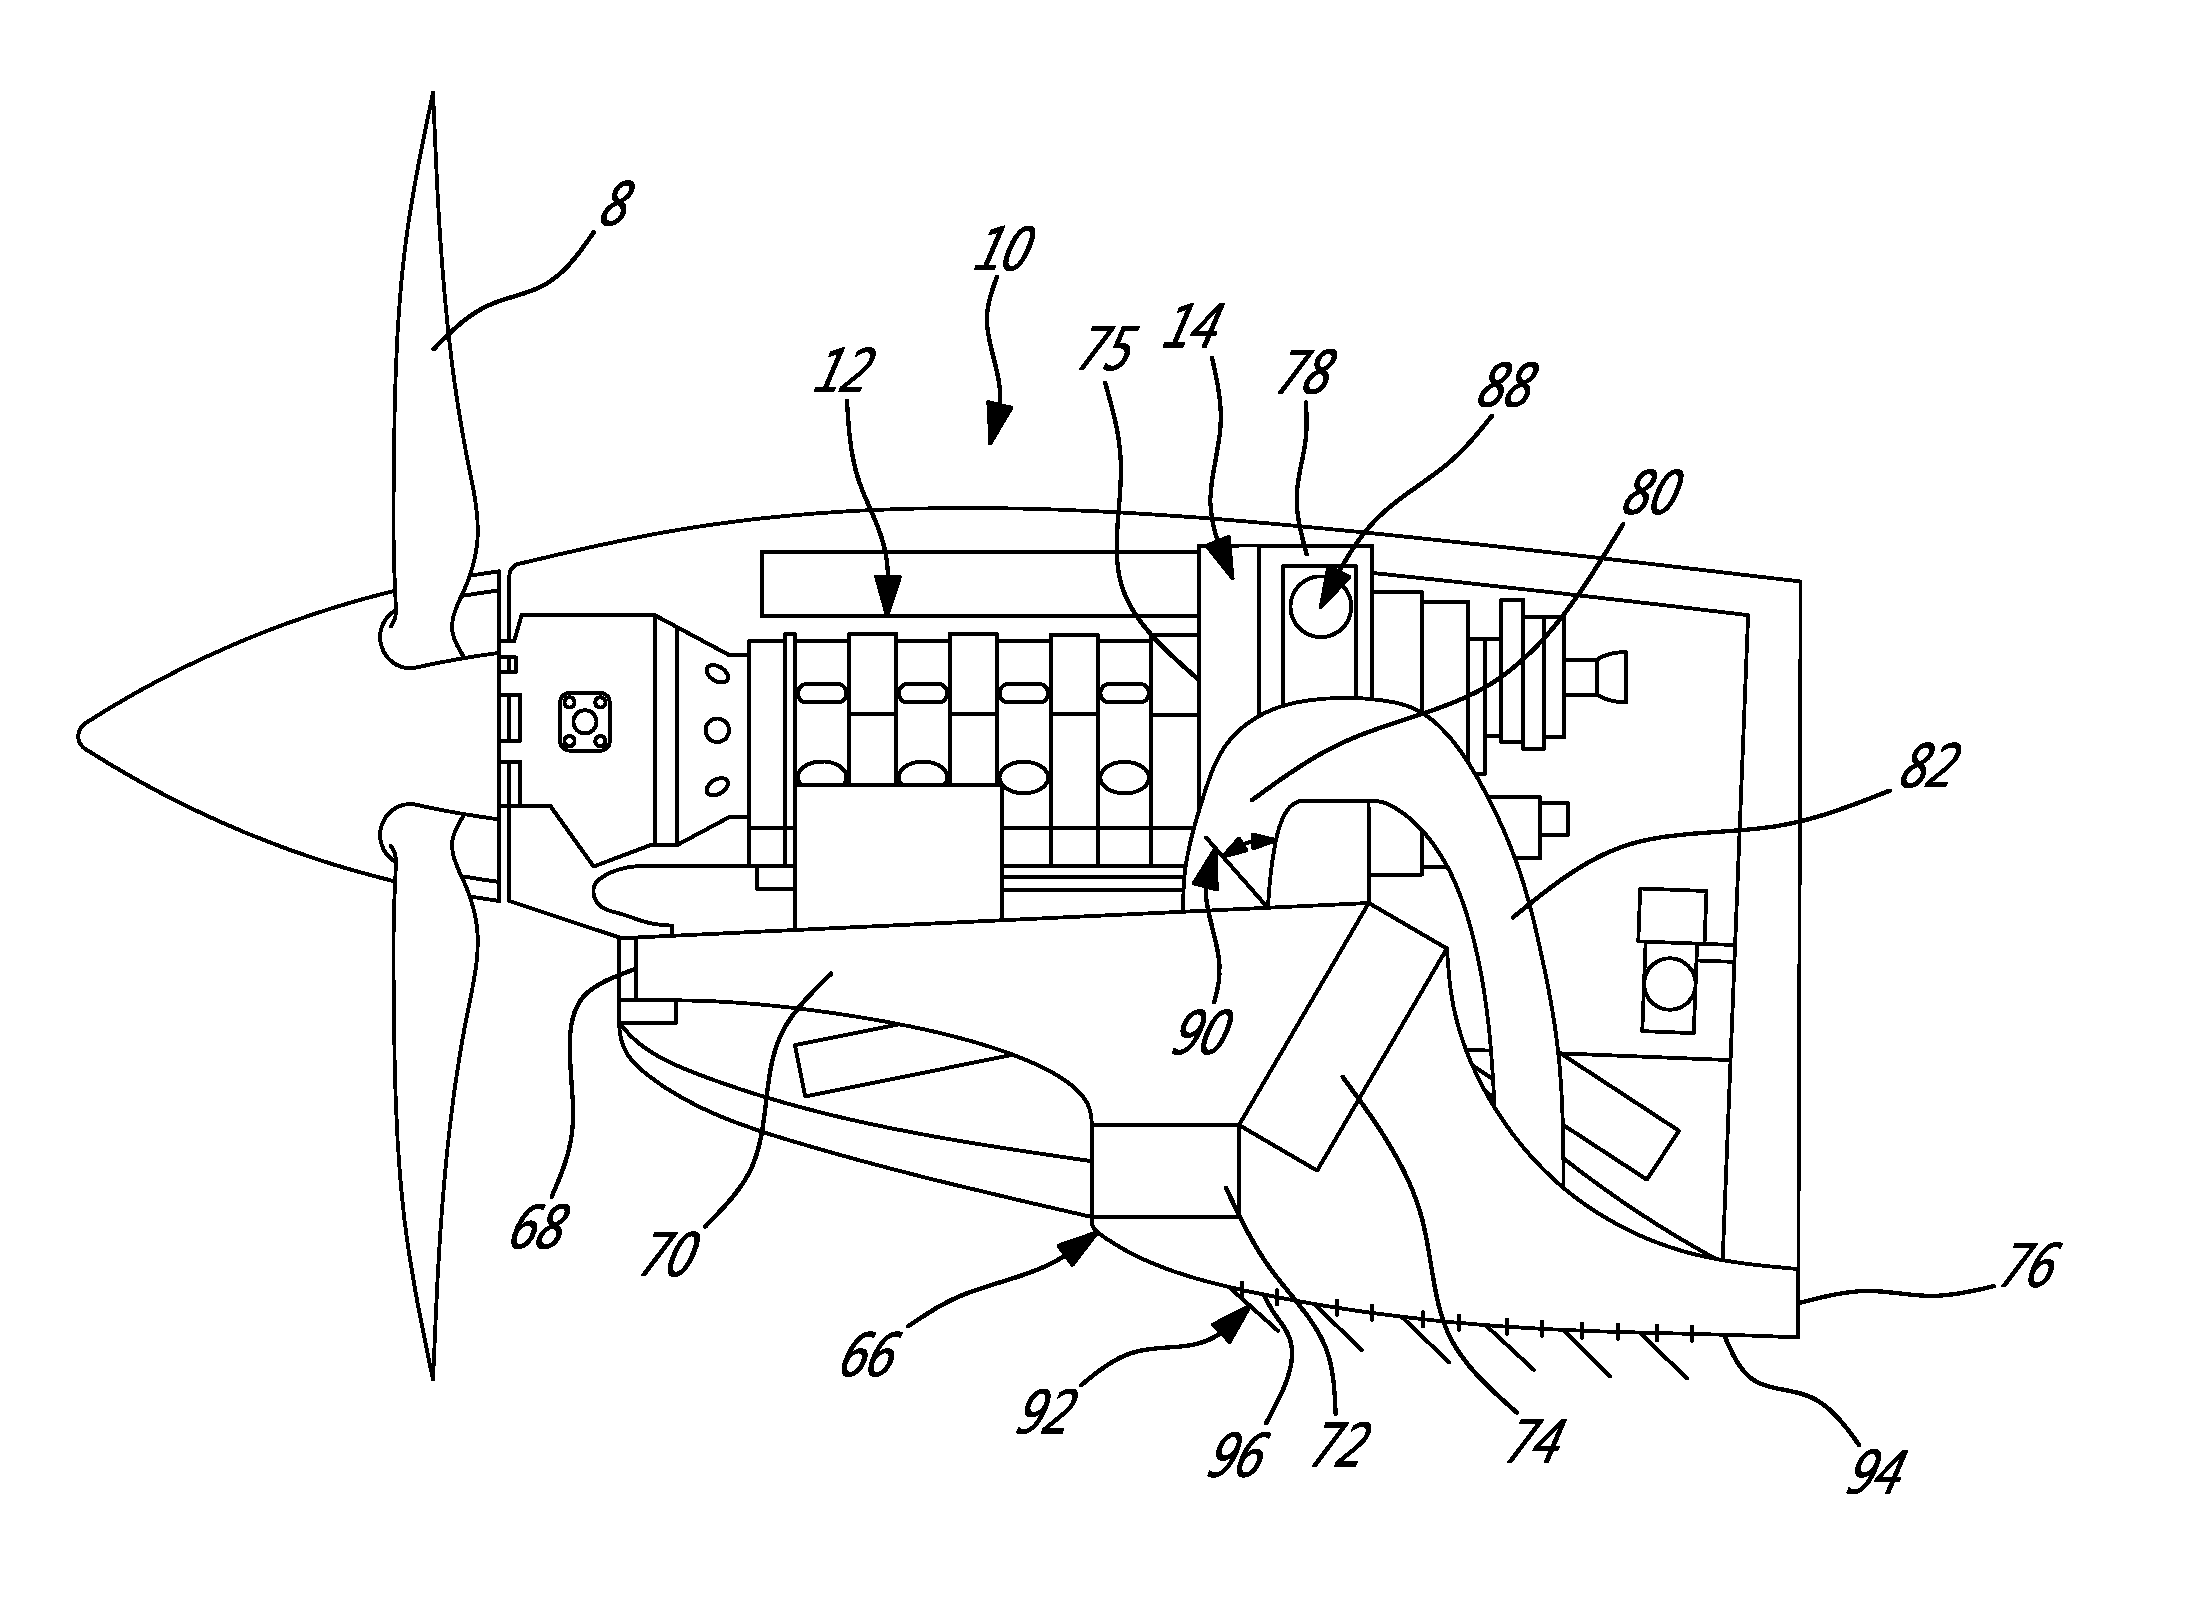 Compound engine assembly with modulated flow